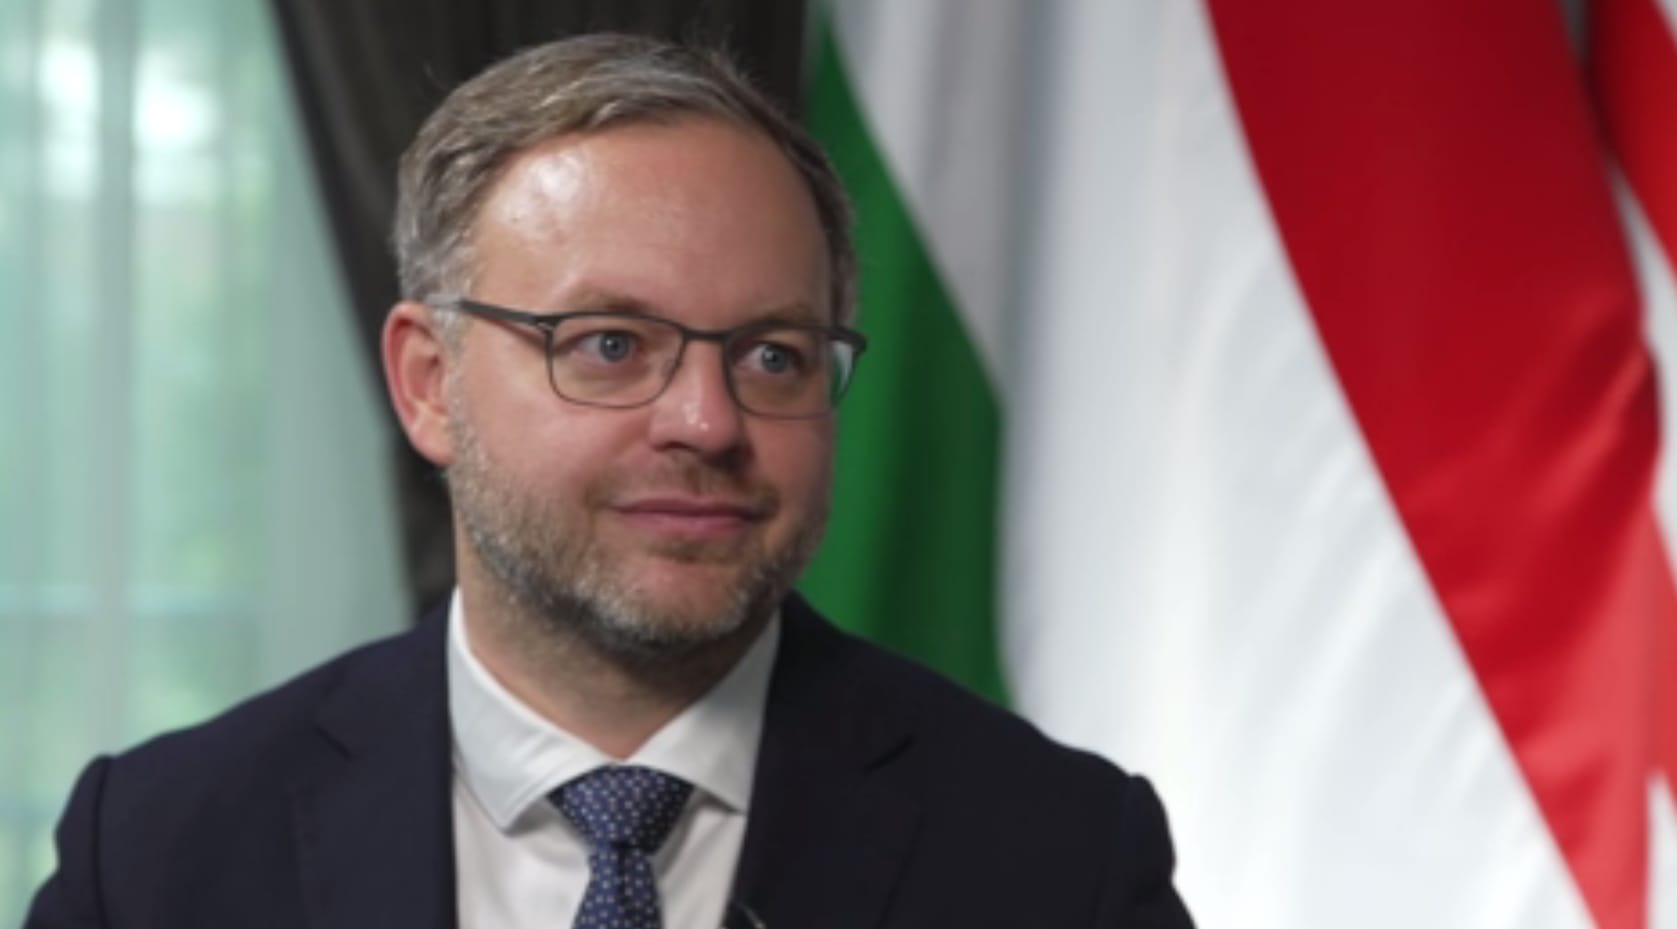 Trump has the 'most pro-European position,' says Hungarian PM Orbán's advisor